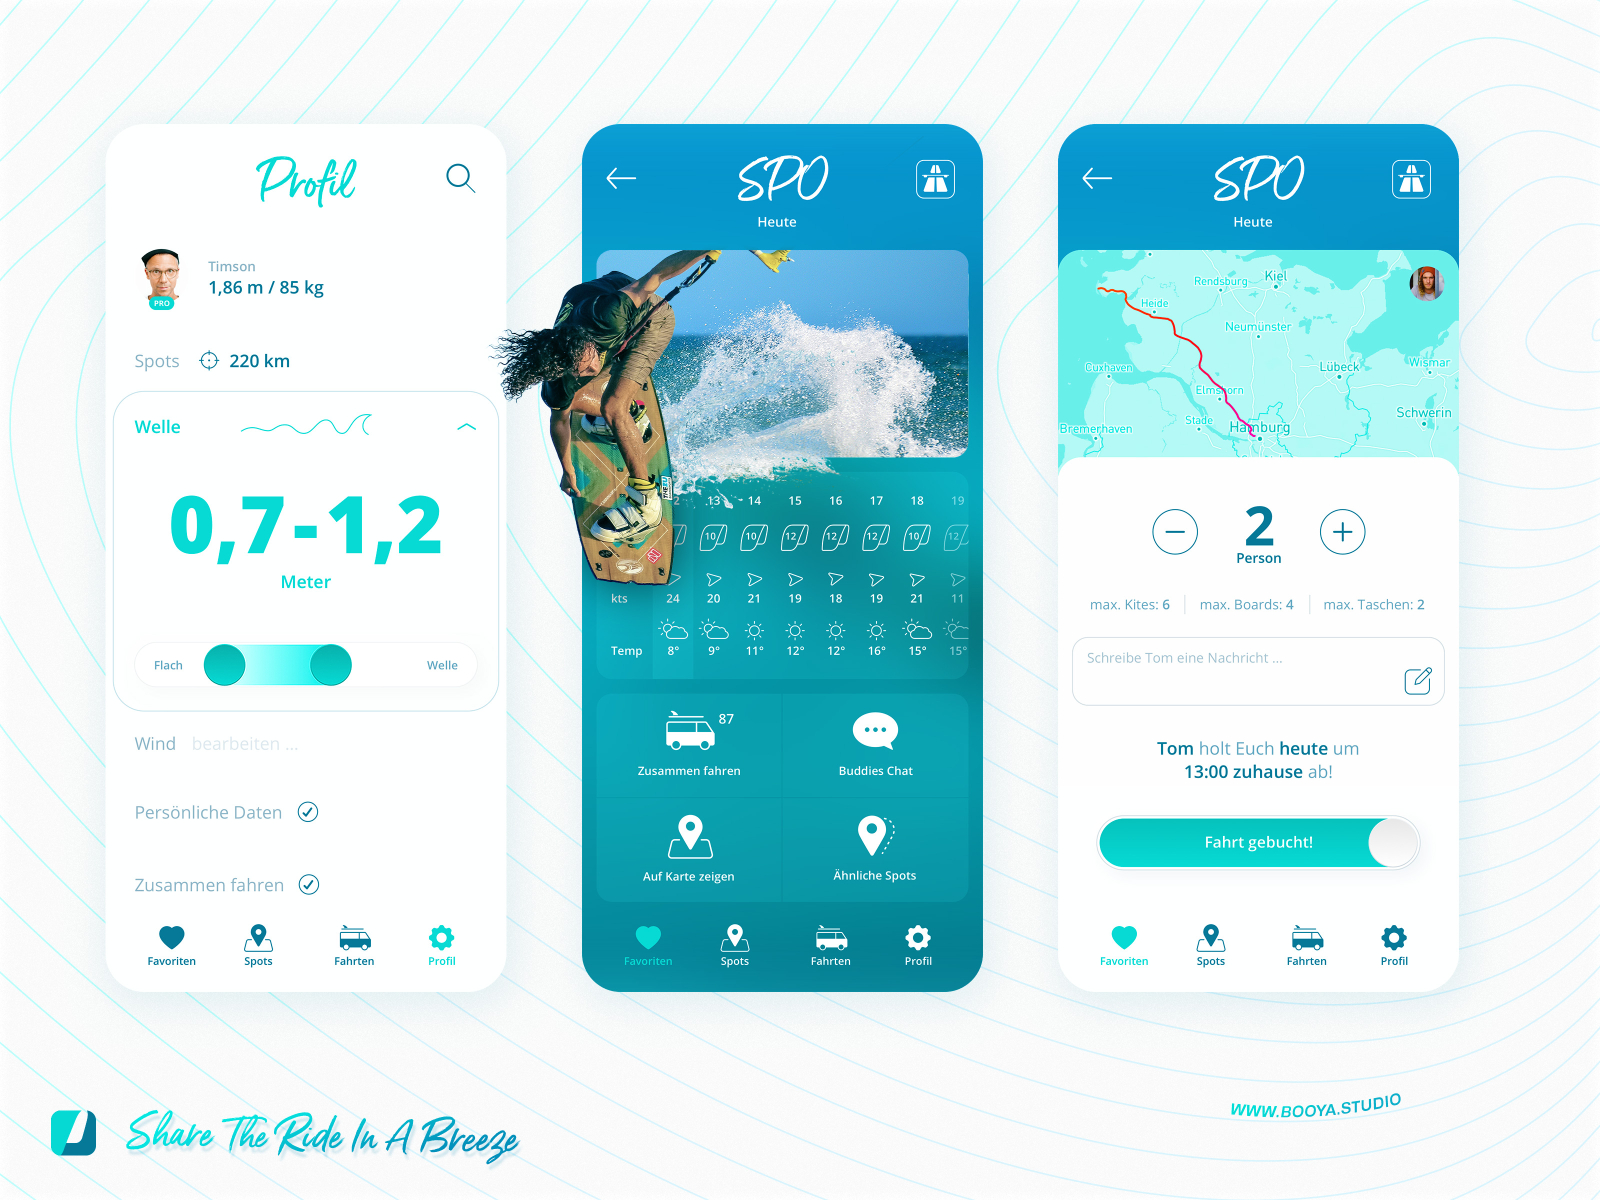 Lift App – Ridesharing in a breeze